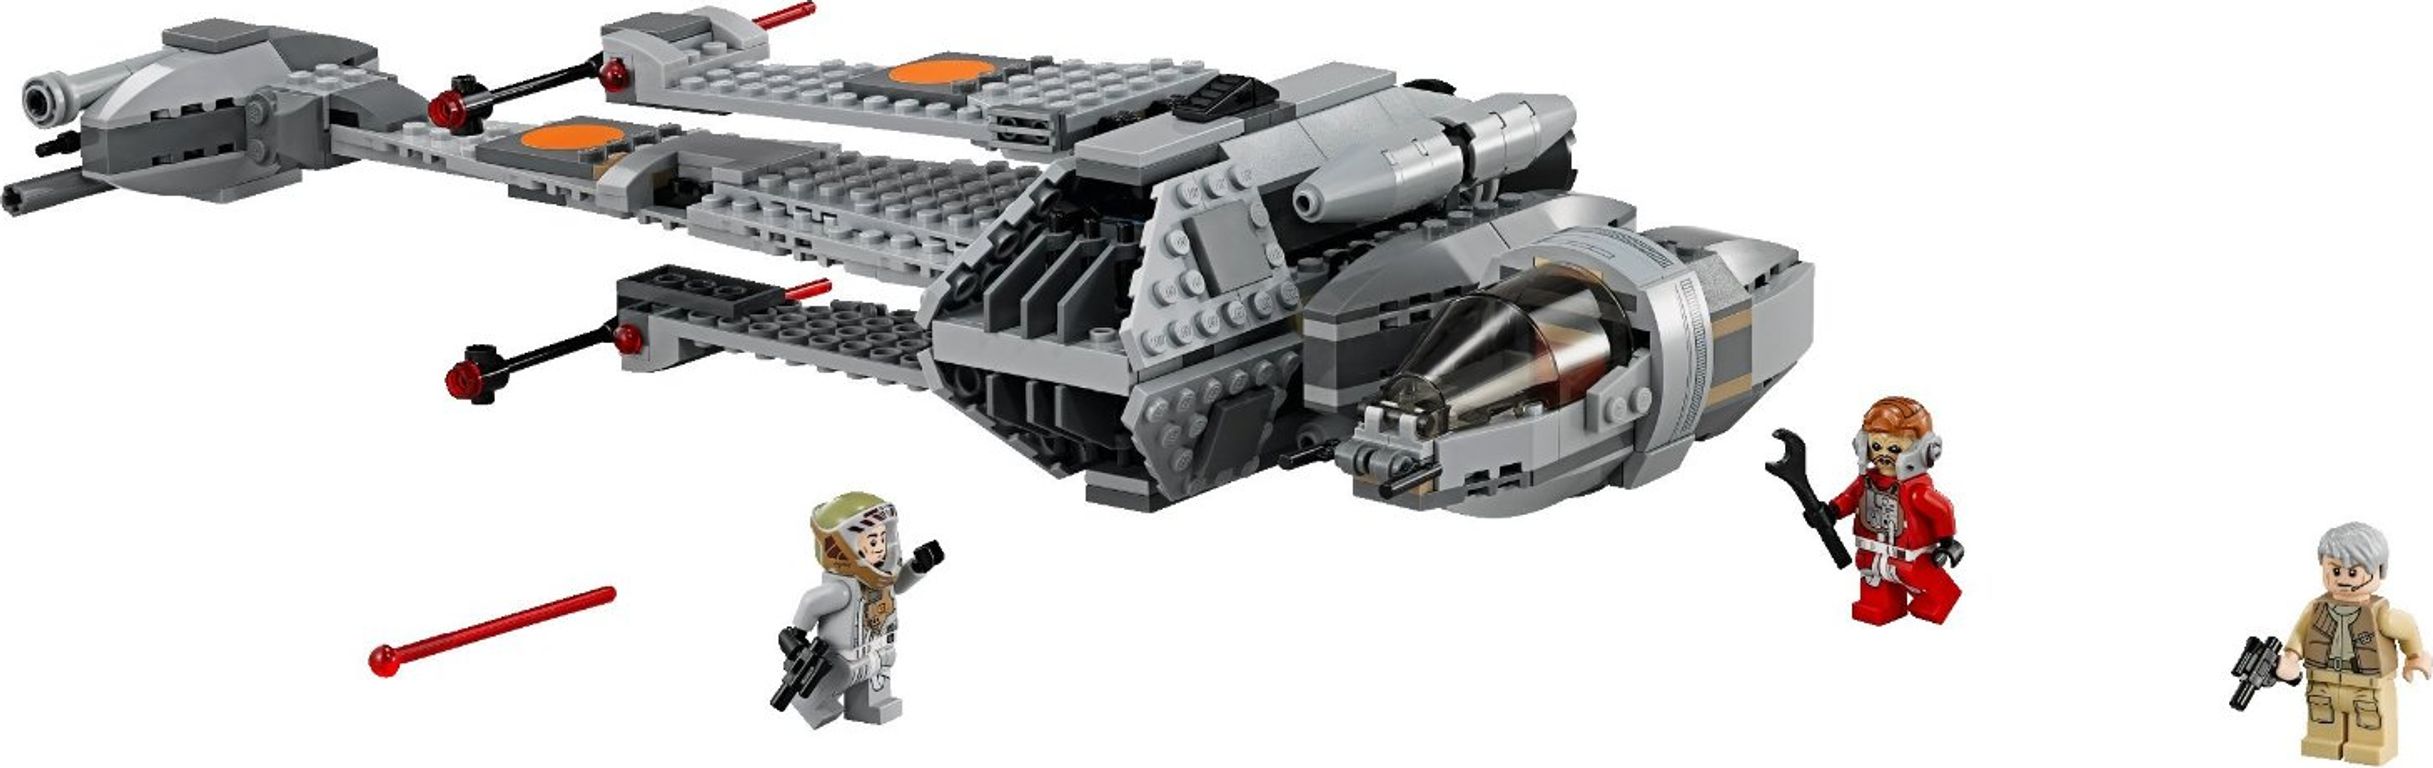 LEGO® Star Wars B-Wing components